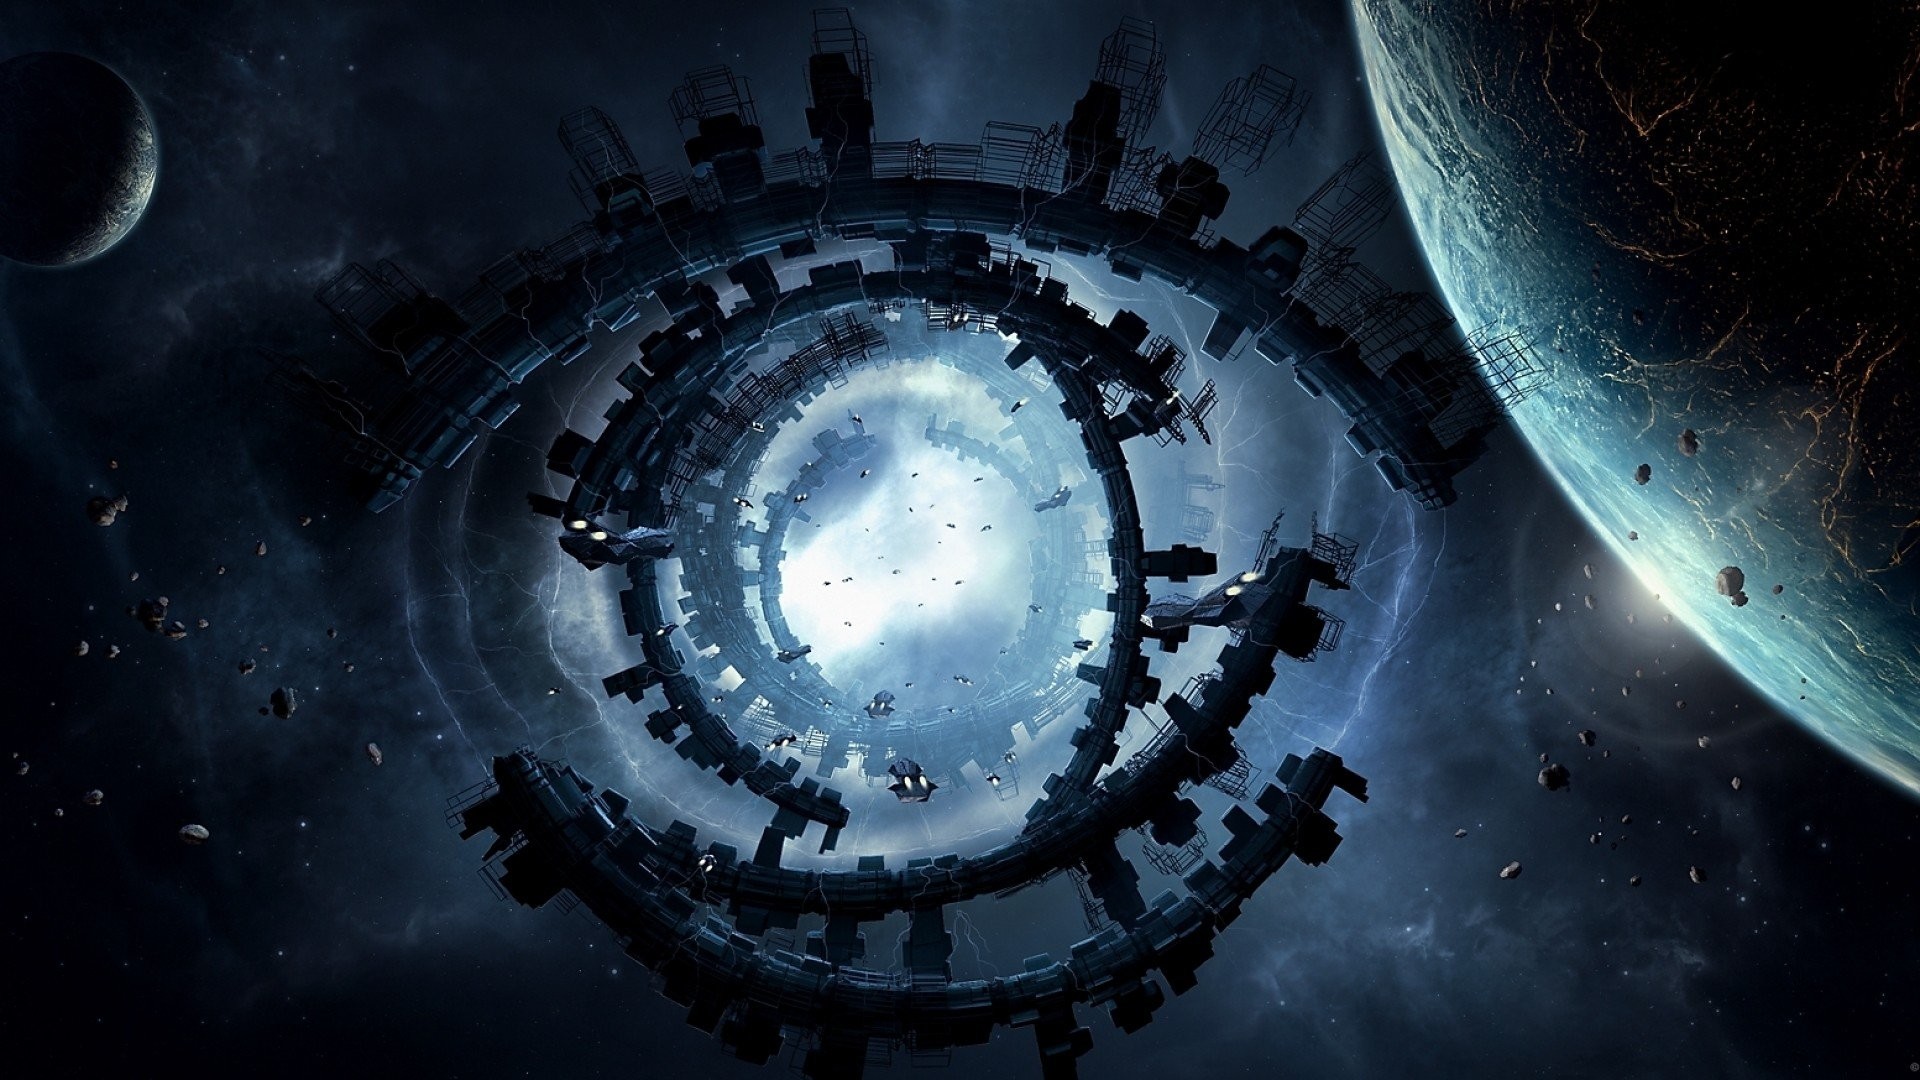 Eyes outer space planets Moon ships buildings fantasy art spaceships space station structure moons Big Bang